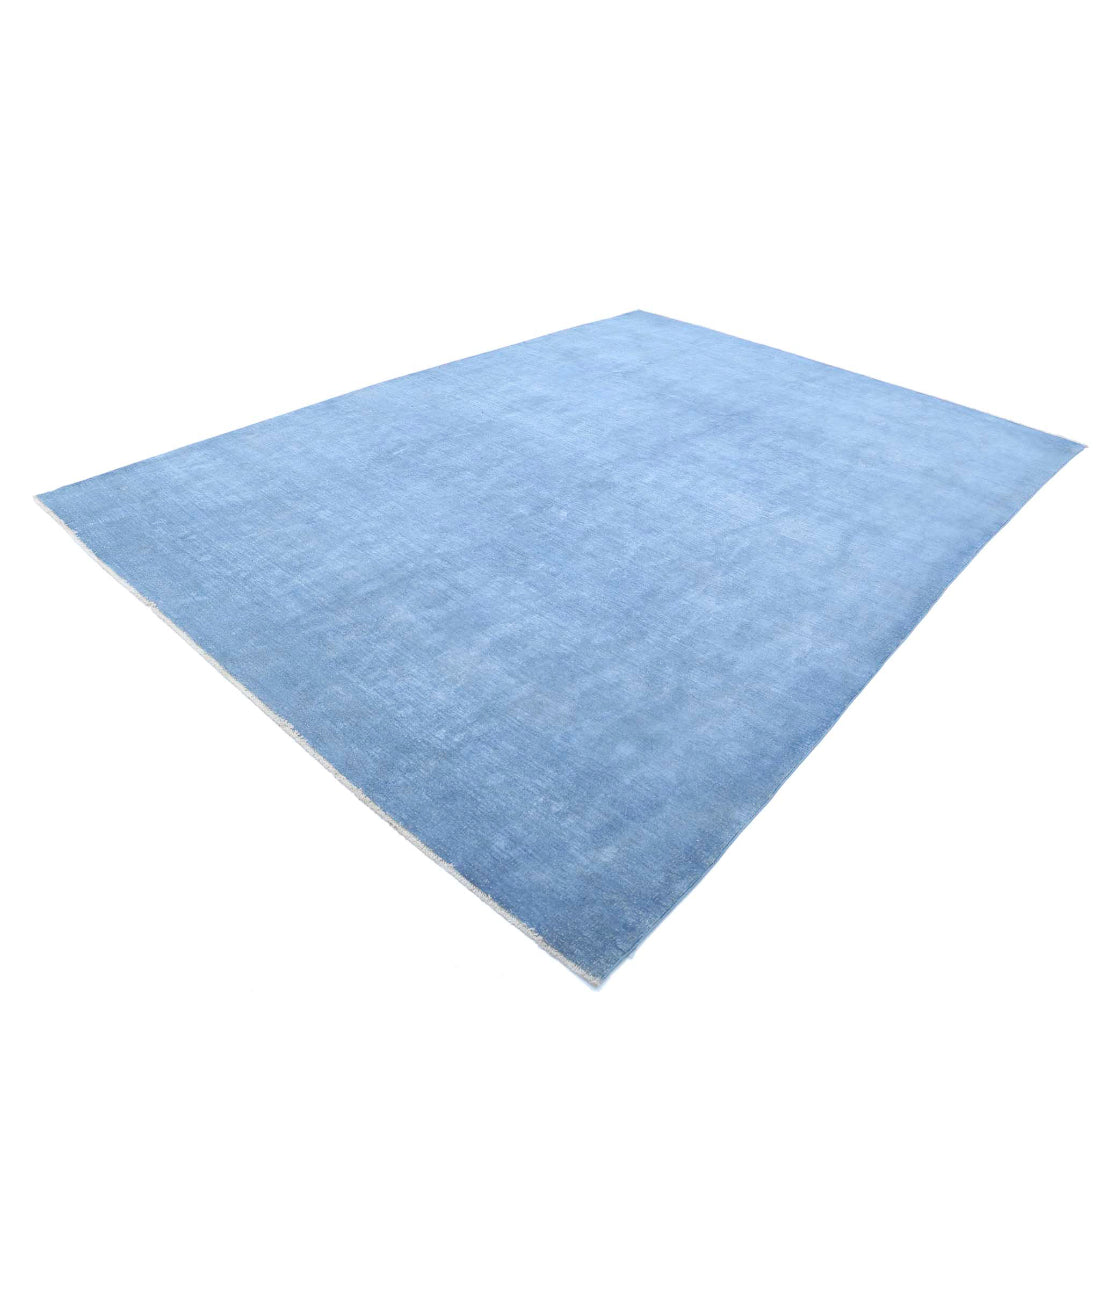 Overdye 8'8'' X 12'0'' Hand-Knotted Wool Rug 8'8'' x 12'0'' (260 X 360) / Blue / N/A